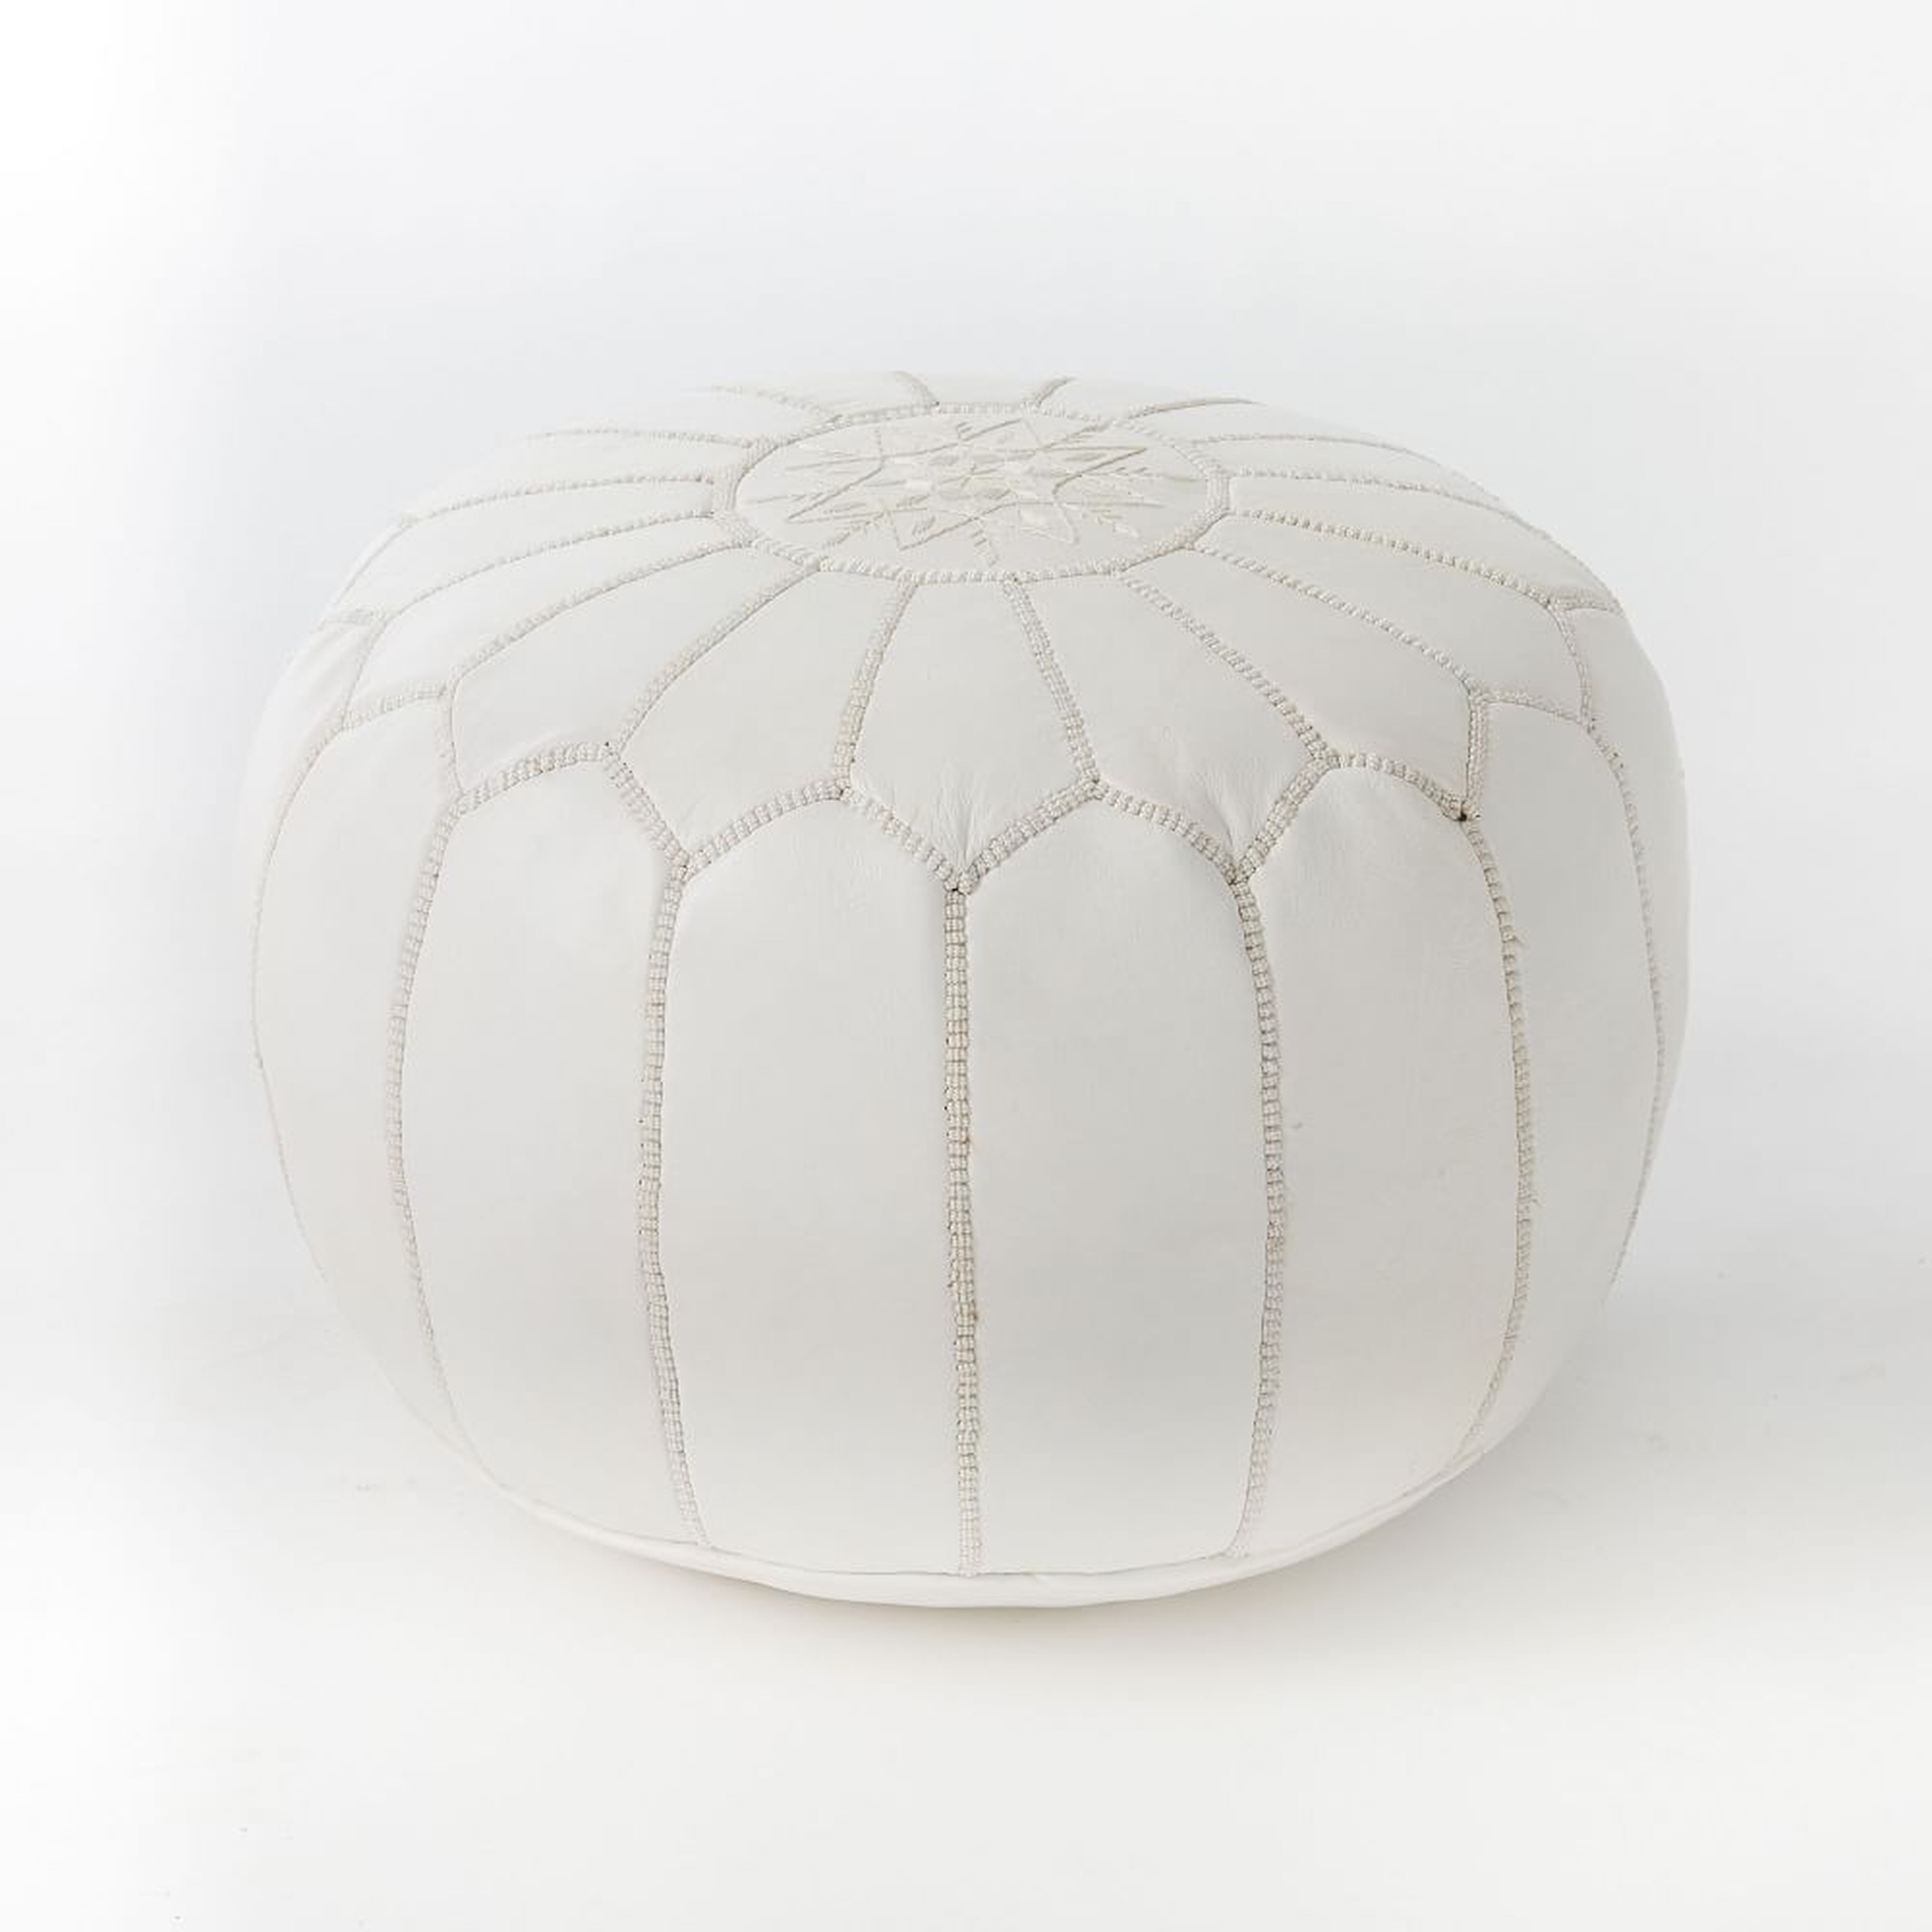 Leather Moroccan Pouf, White - West Elm